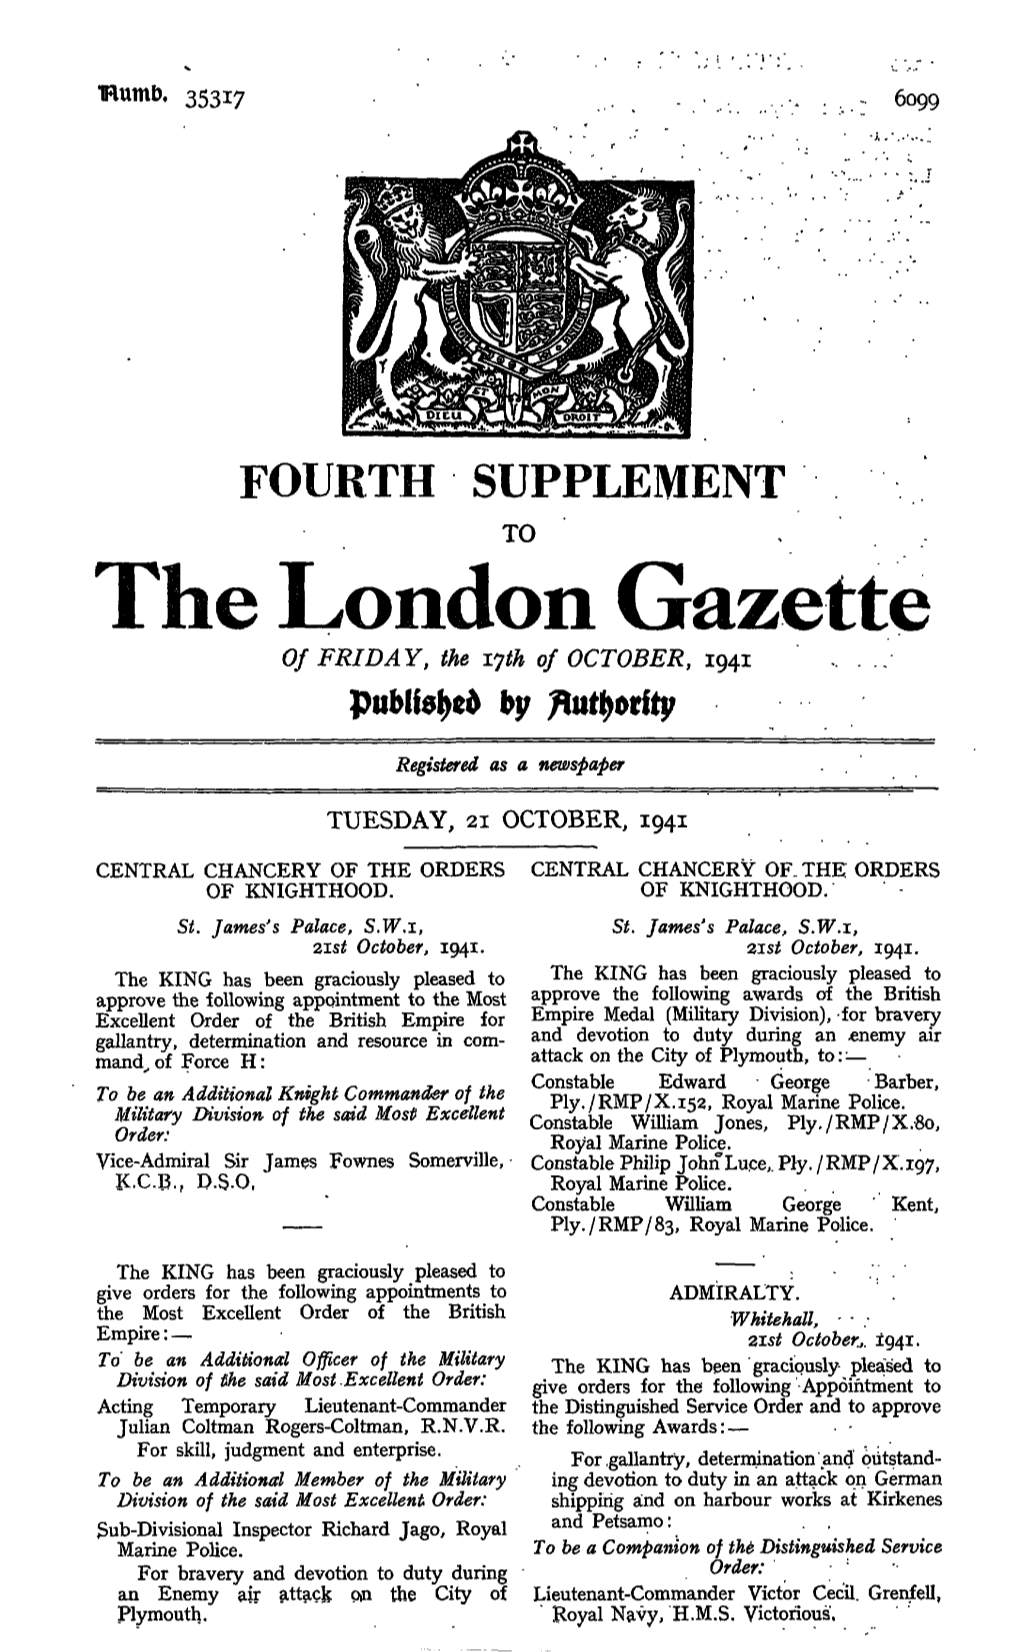 The London Gazette of FRIDAY, the Ijth of OCTOBER, 1941